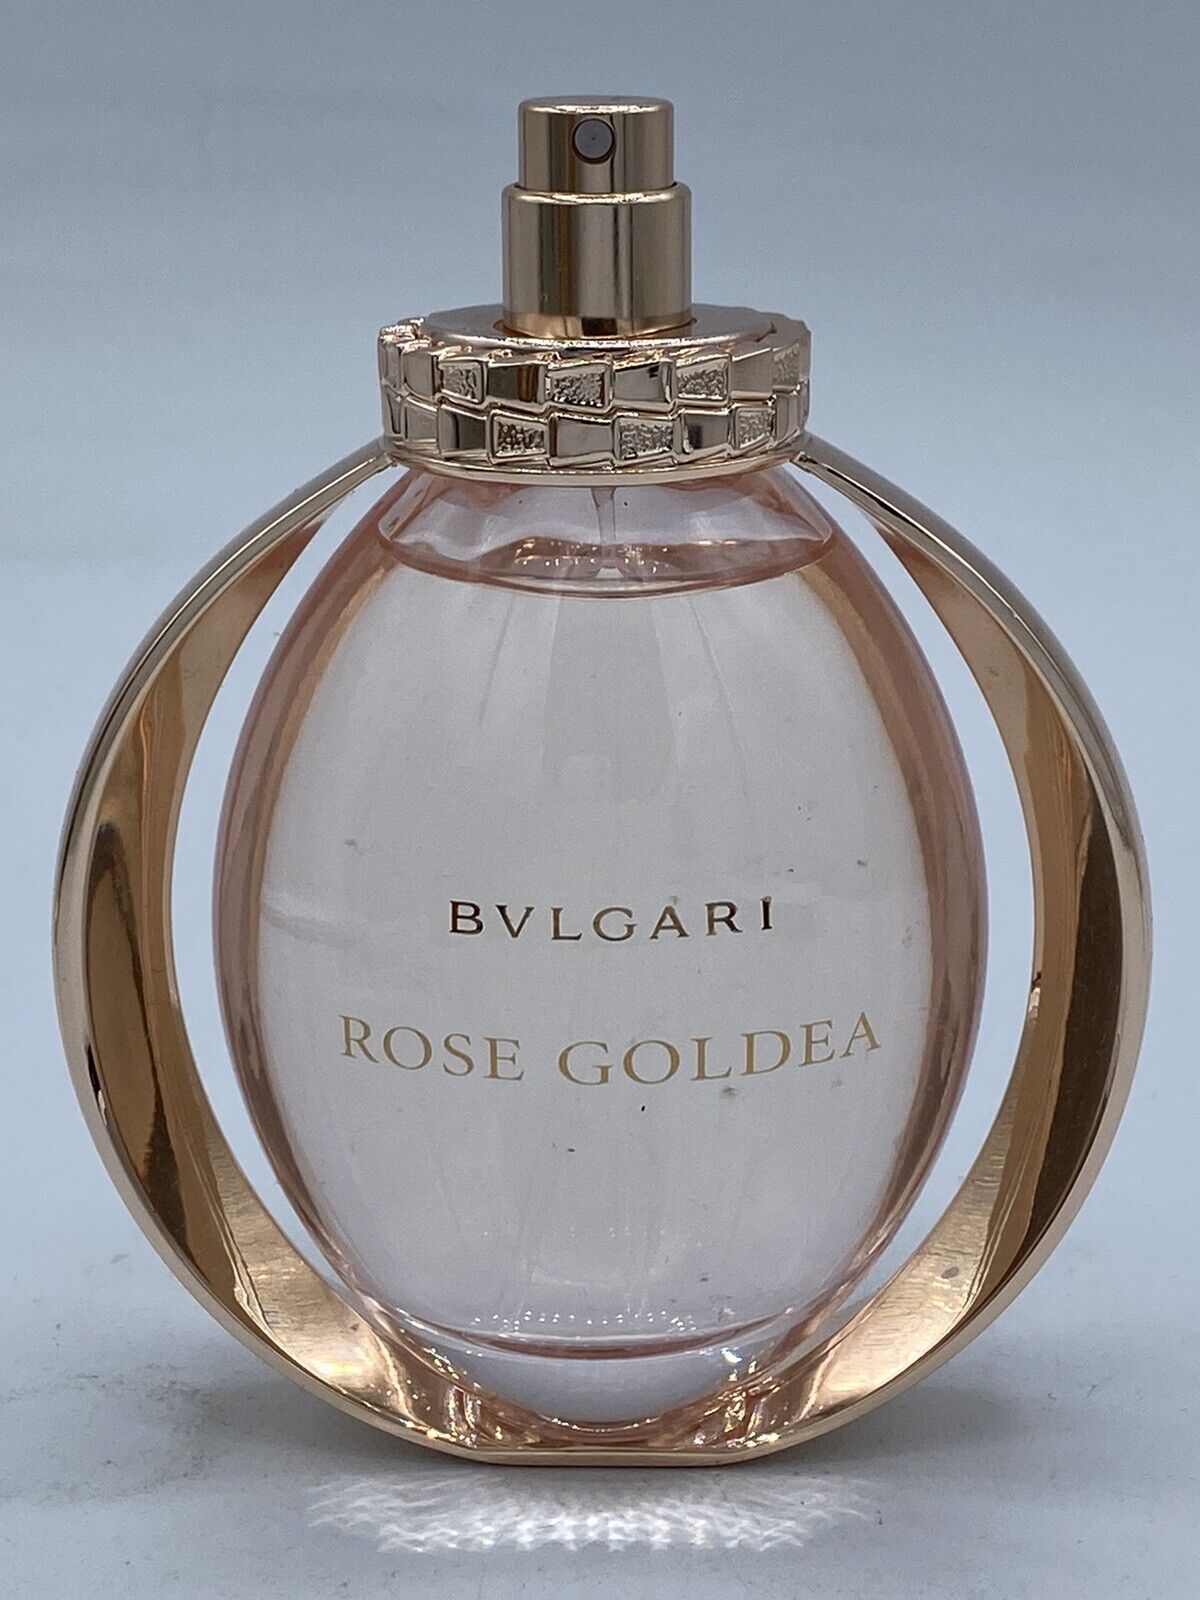 Bvlgari Rose Goldea EDP 3 oz. 90 Ml. About 95% Full Without Box & Cap Authentic.